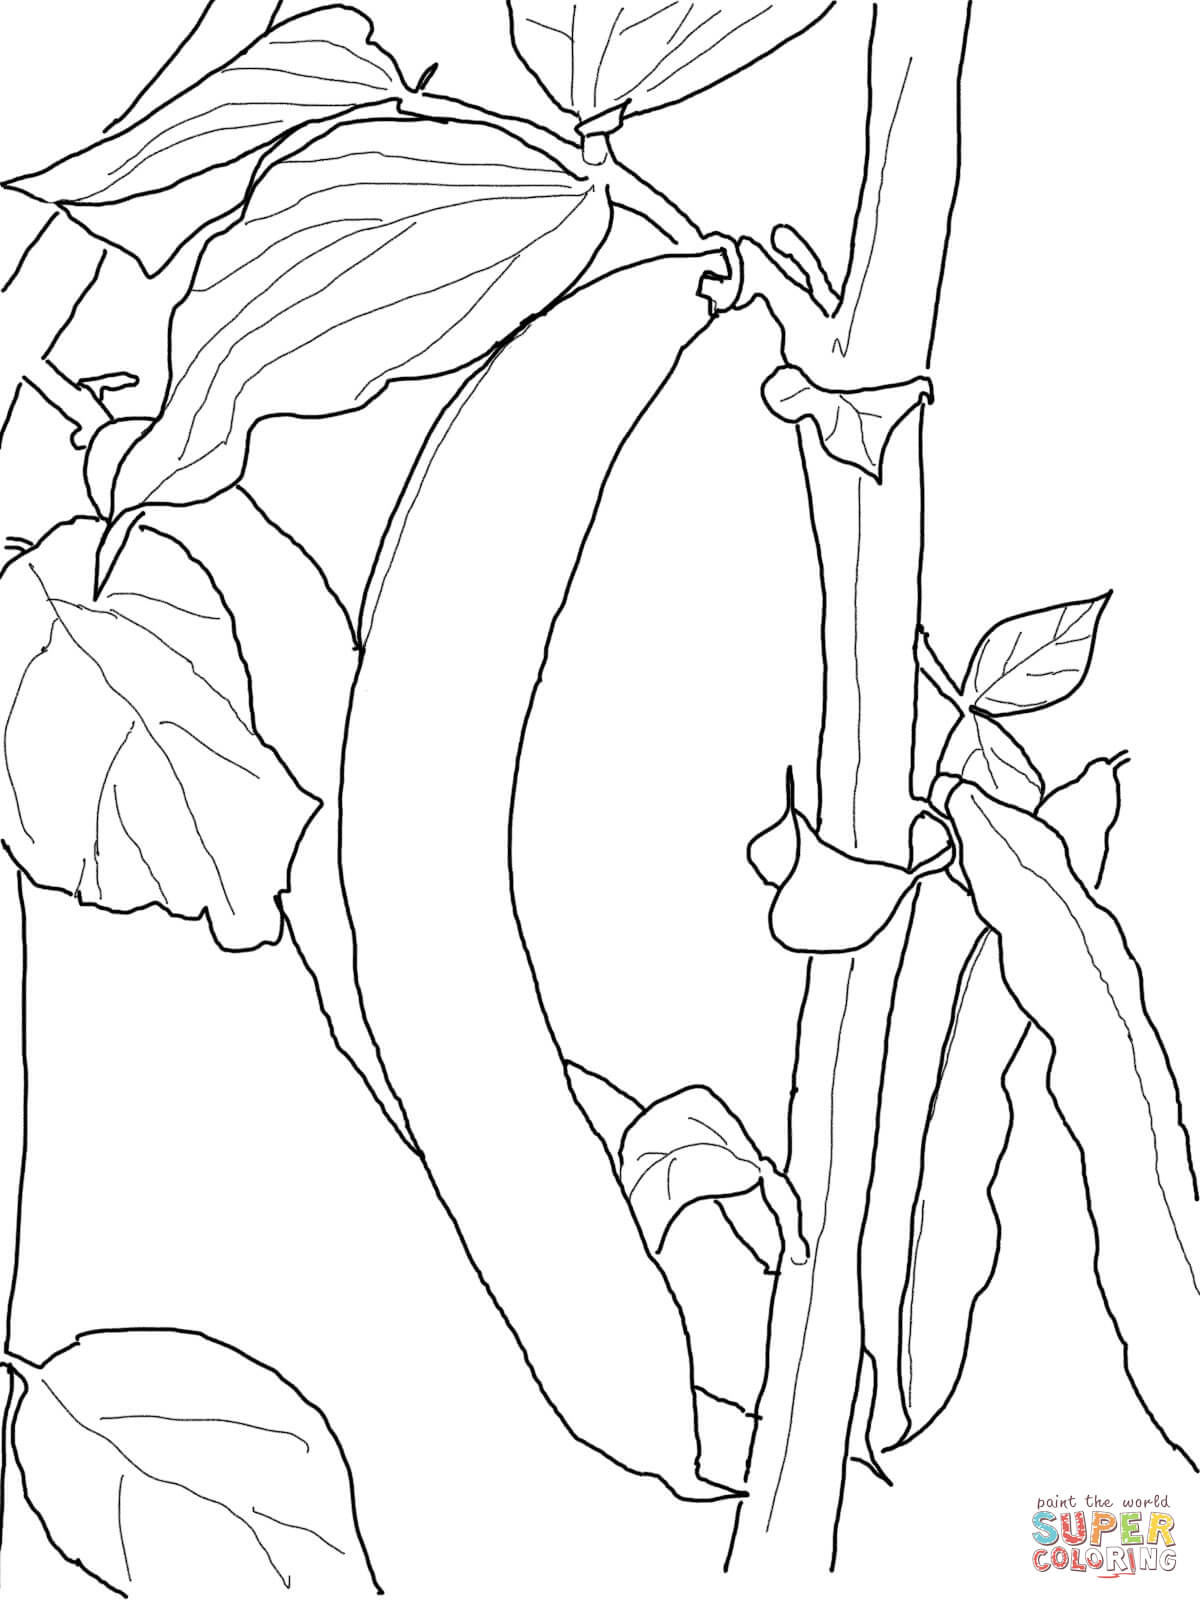 Bean Sprout coloring page | Free Printable Coloring Pages